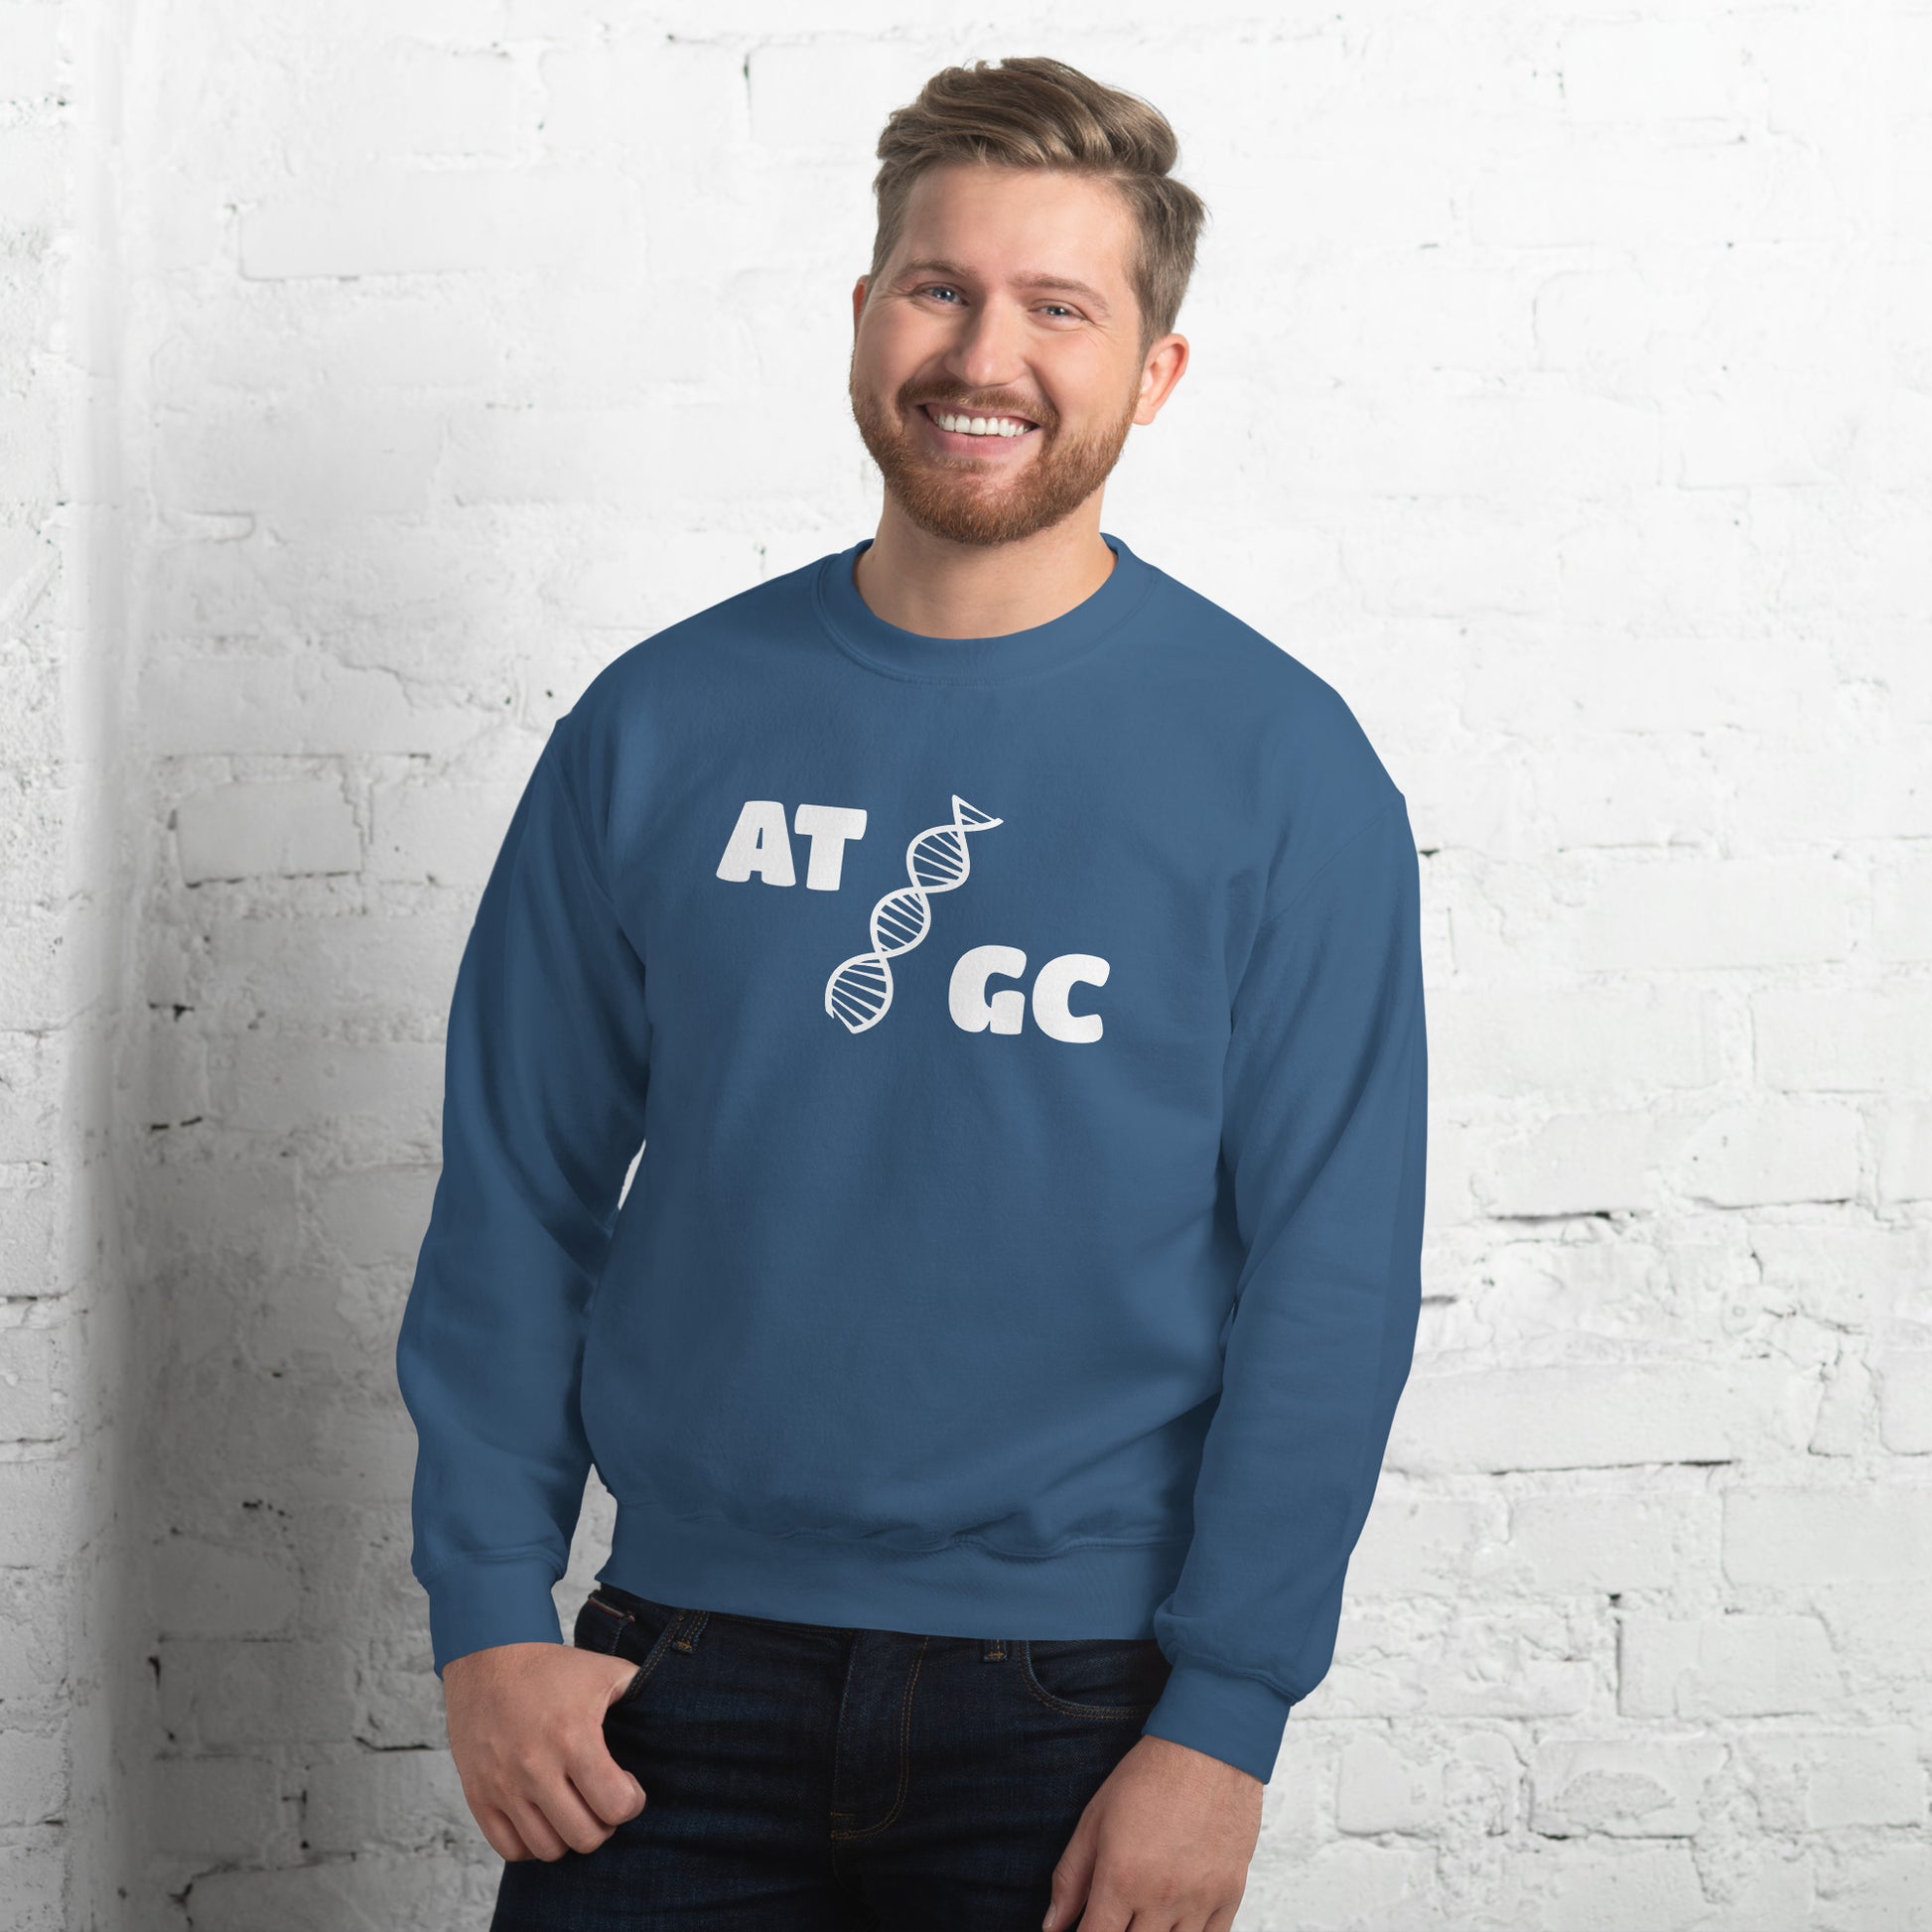 Men with indigo blue sweatshirt with image of a DNA string and the text "ATGC"